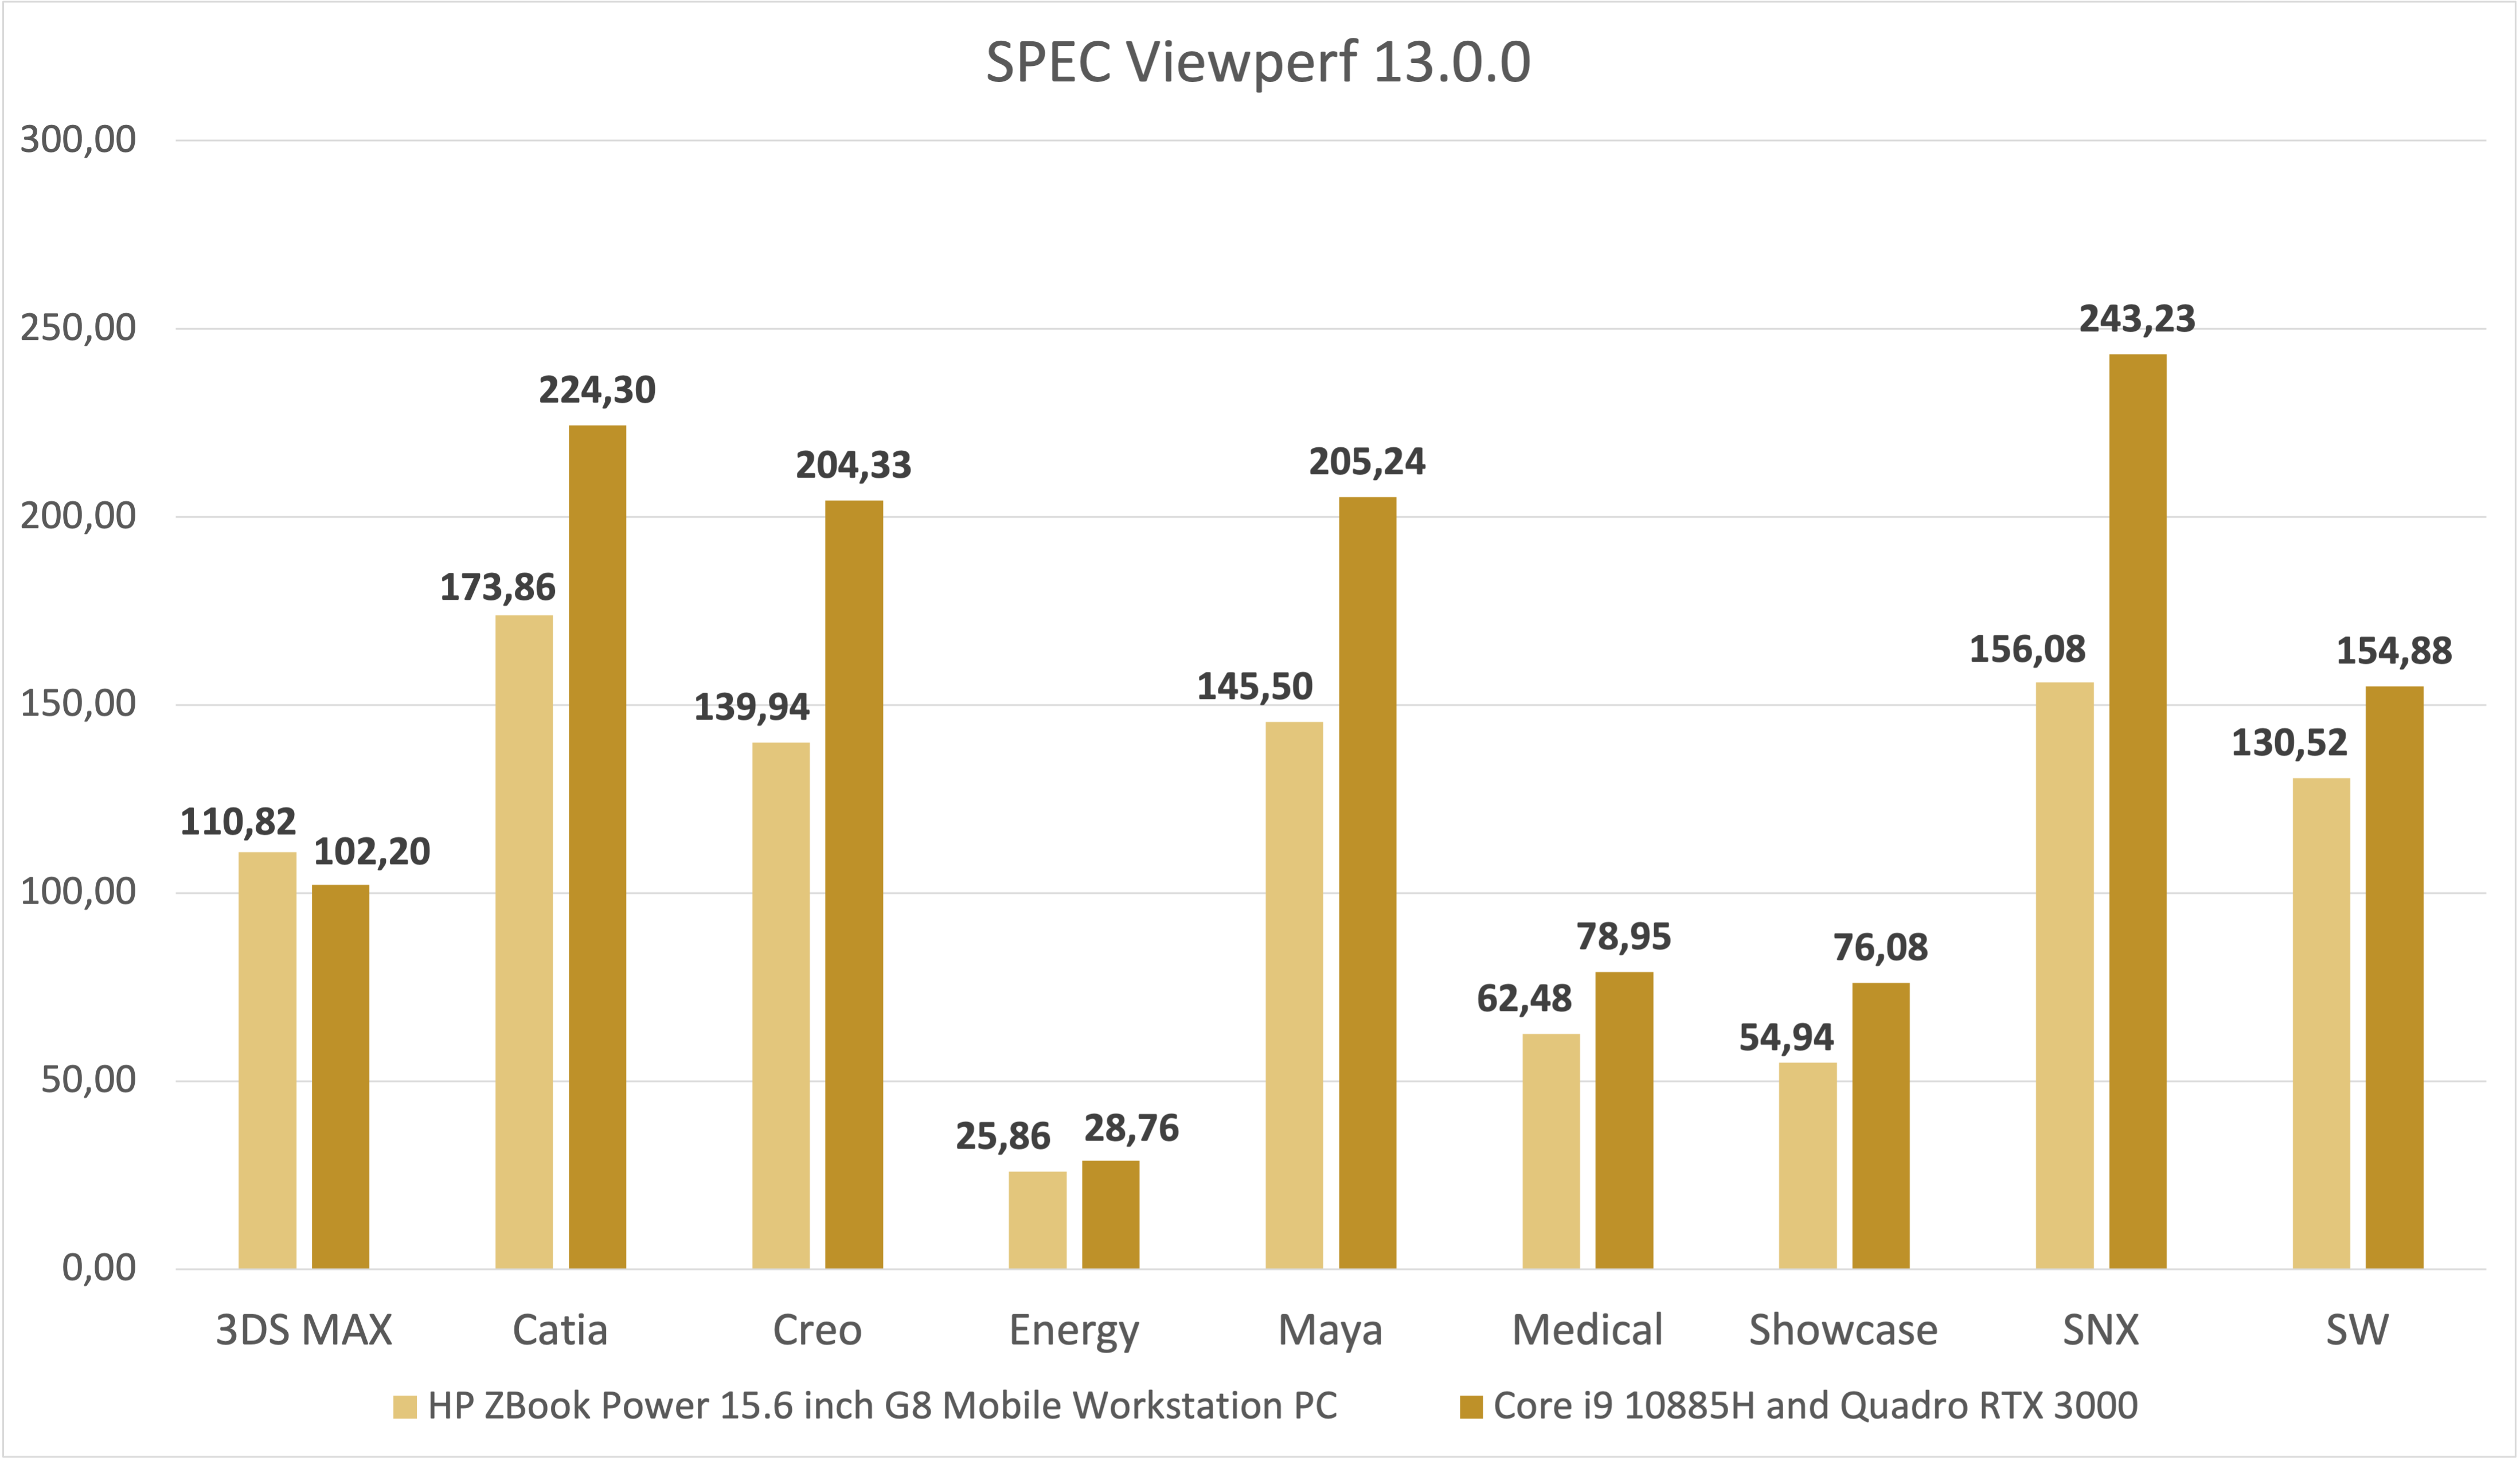 Viewperf tests GPU drawing performance using data sets from design, media content creation, science, and engineering. The RTX 3000 generally has a performance advantage over the RTX A2000.